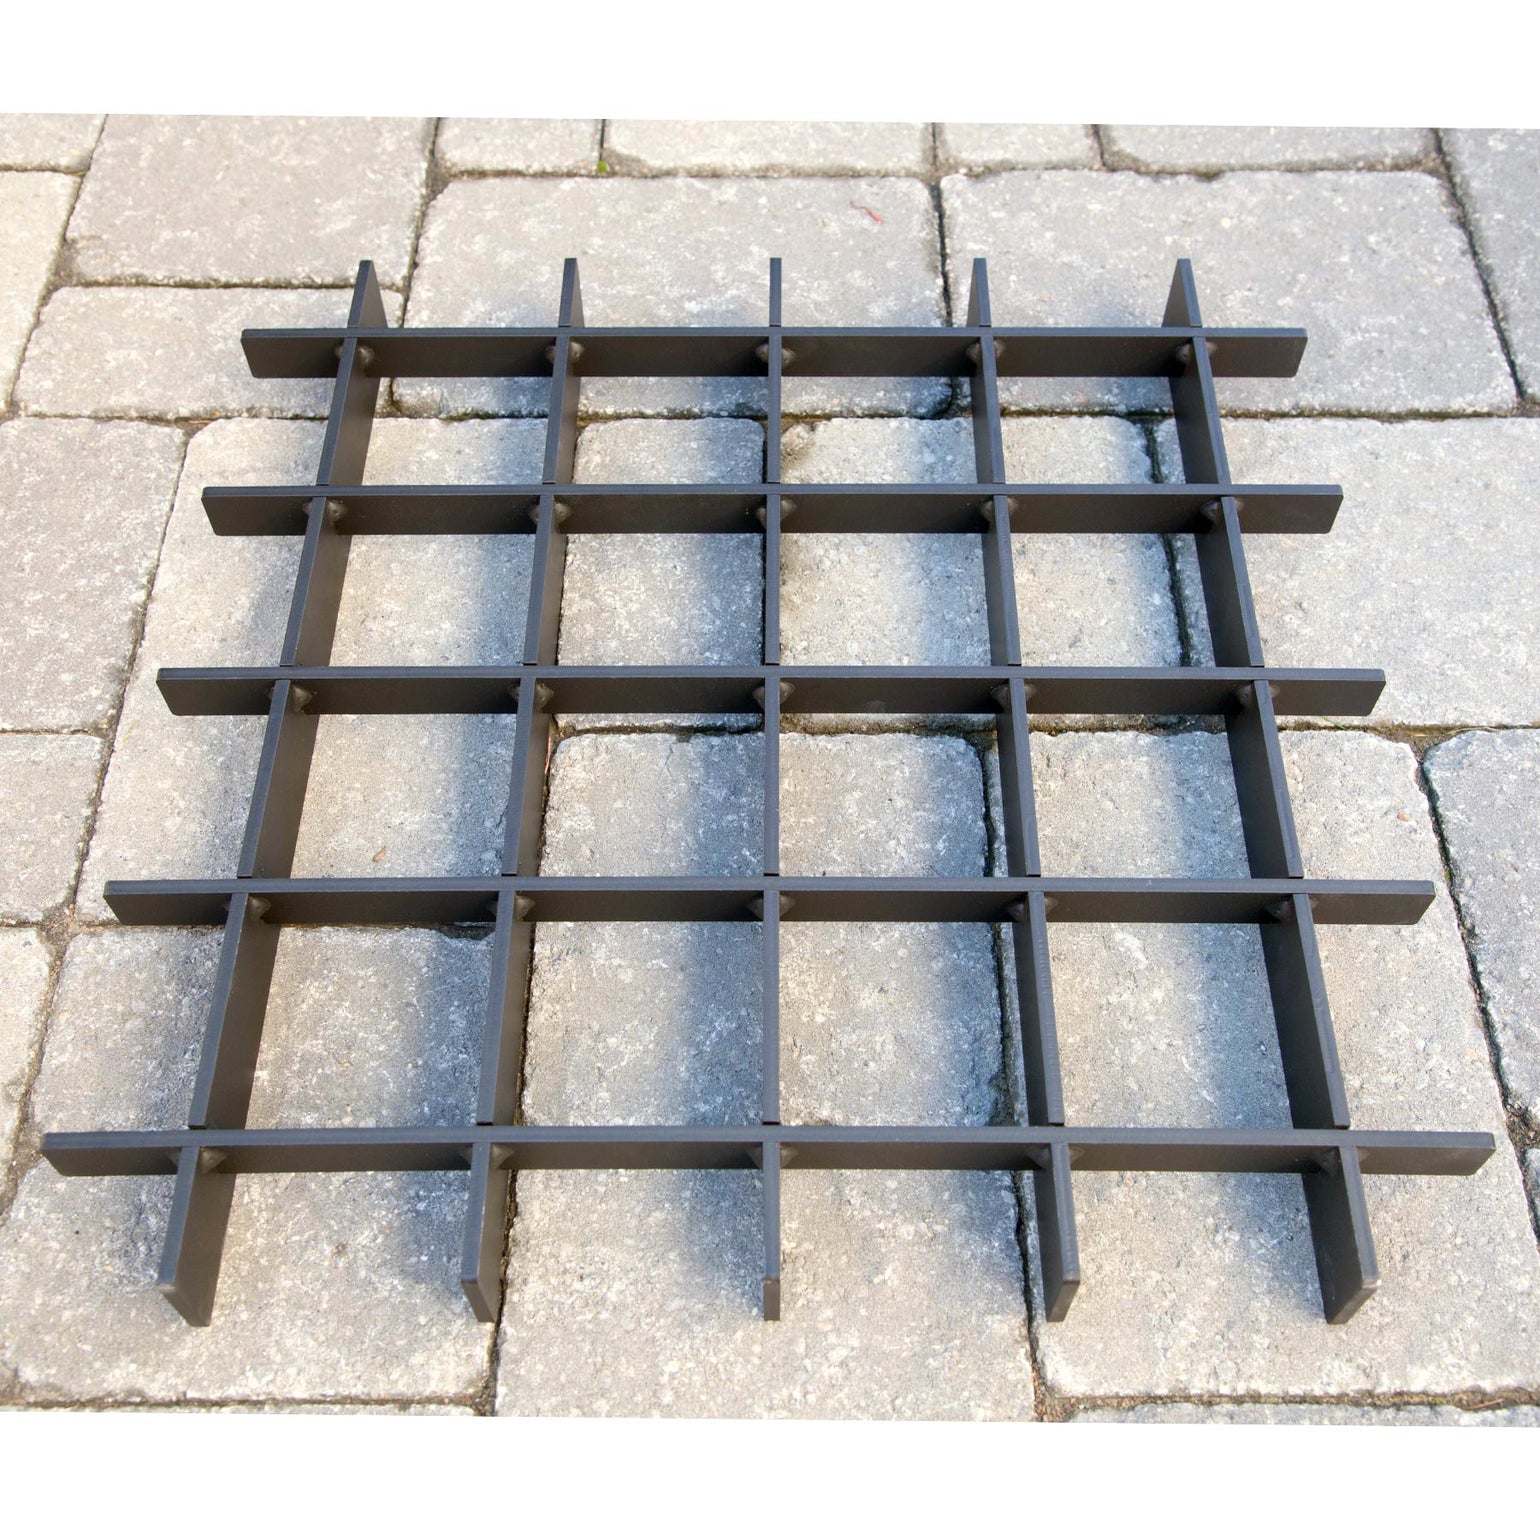 Large Fire Grate